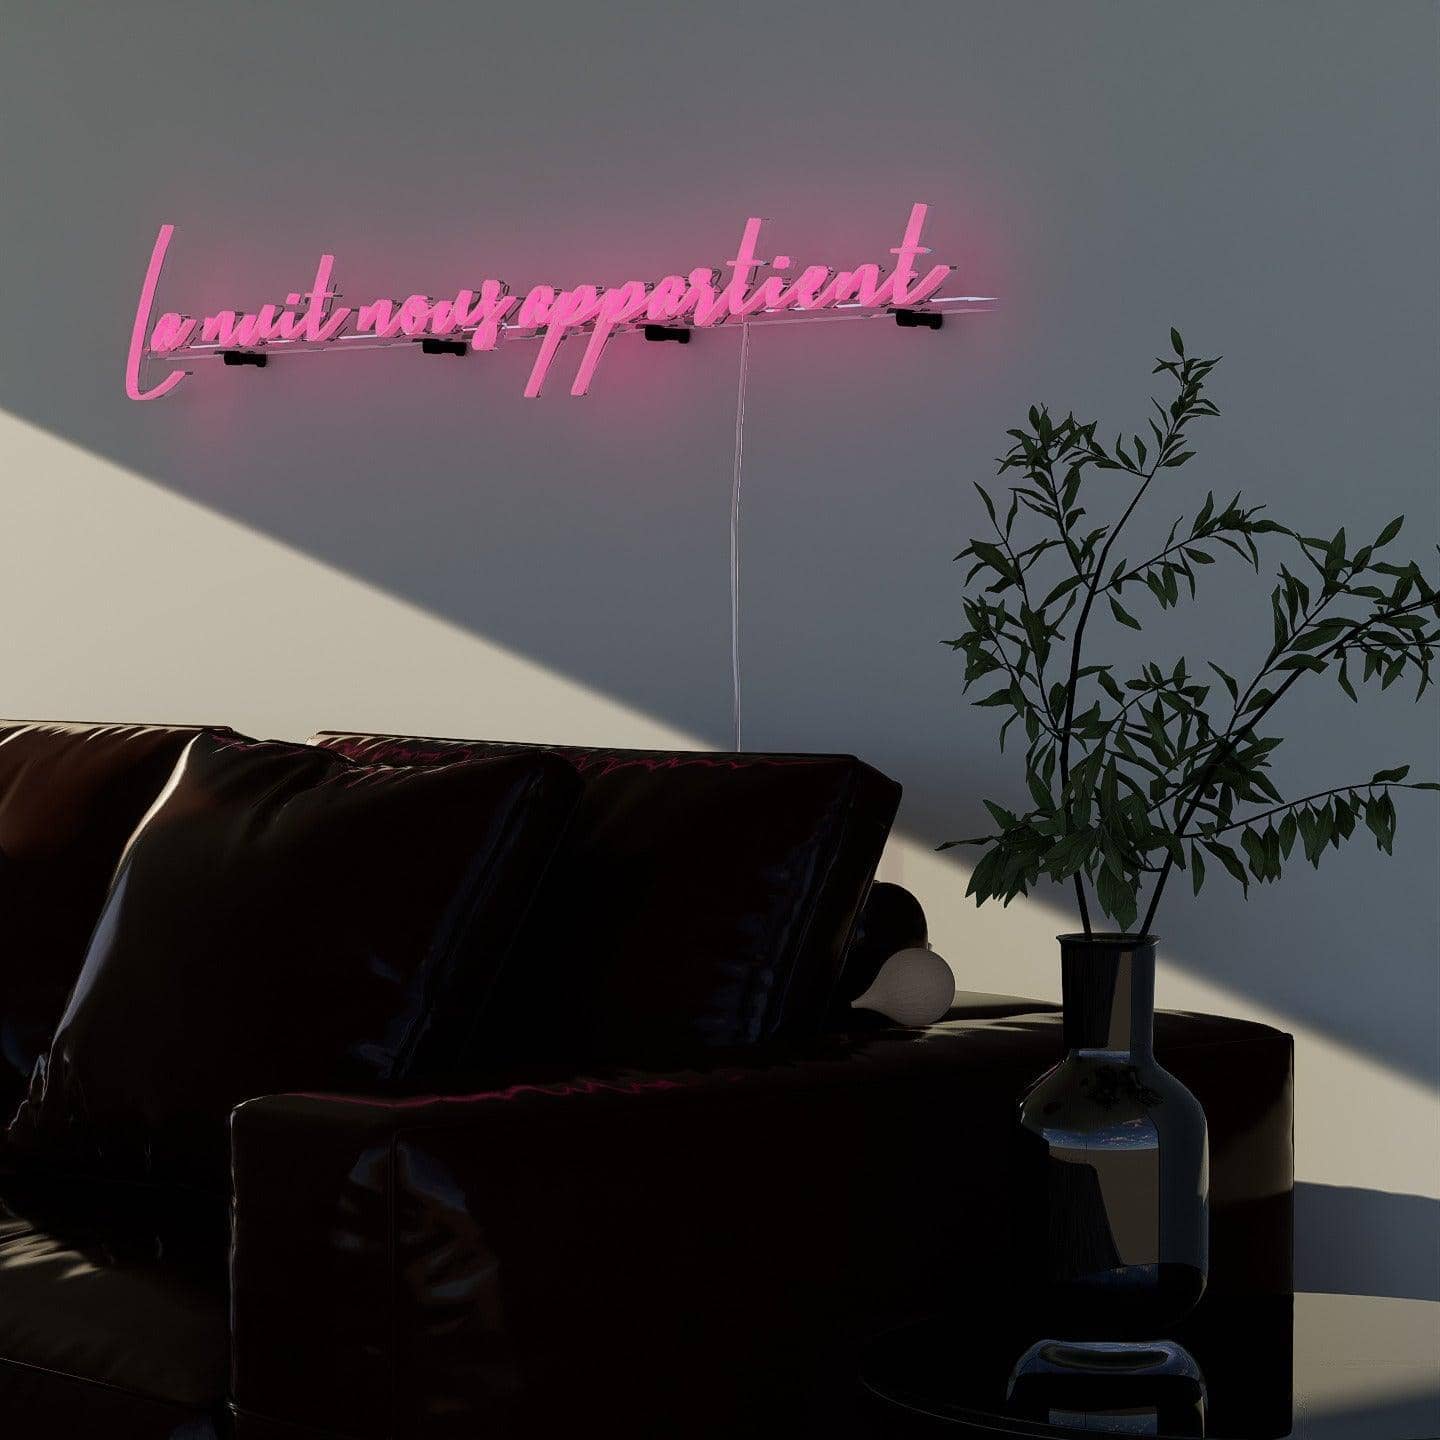 light-up-pink-neon-lights-during-the-day-and-hang-on-the-wall-for-display-la-nuit-nous-appartient